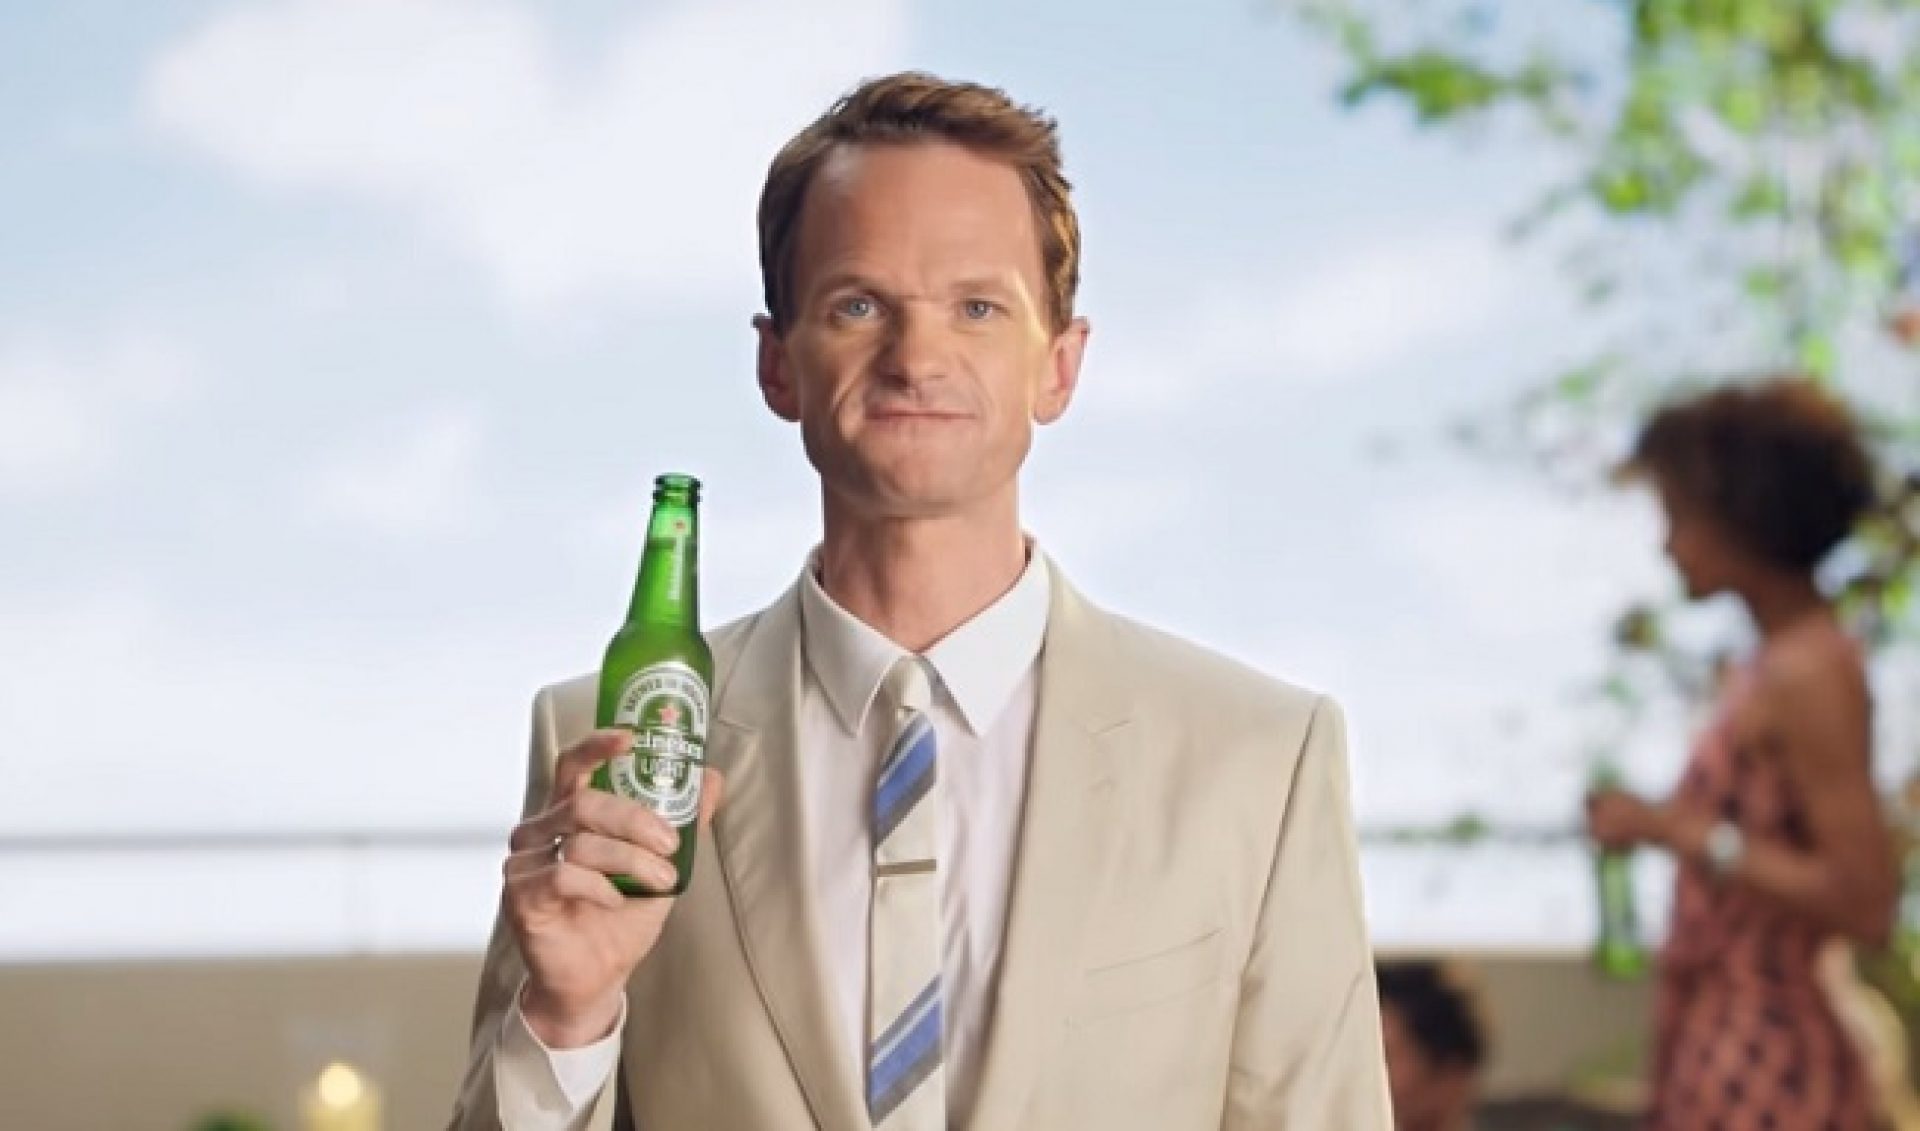 Facebook And YouTube Are “Equal Players” In Terms Of Video Ads Says Heineken Exec